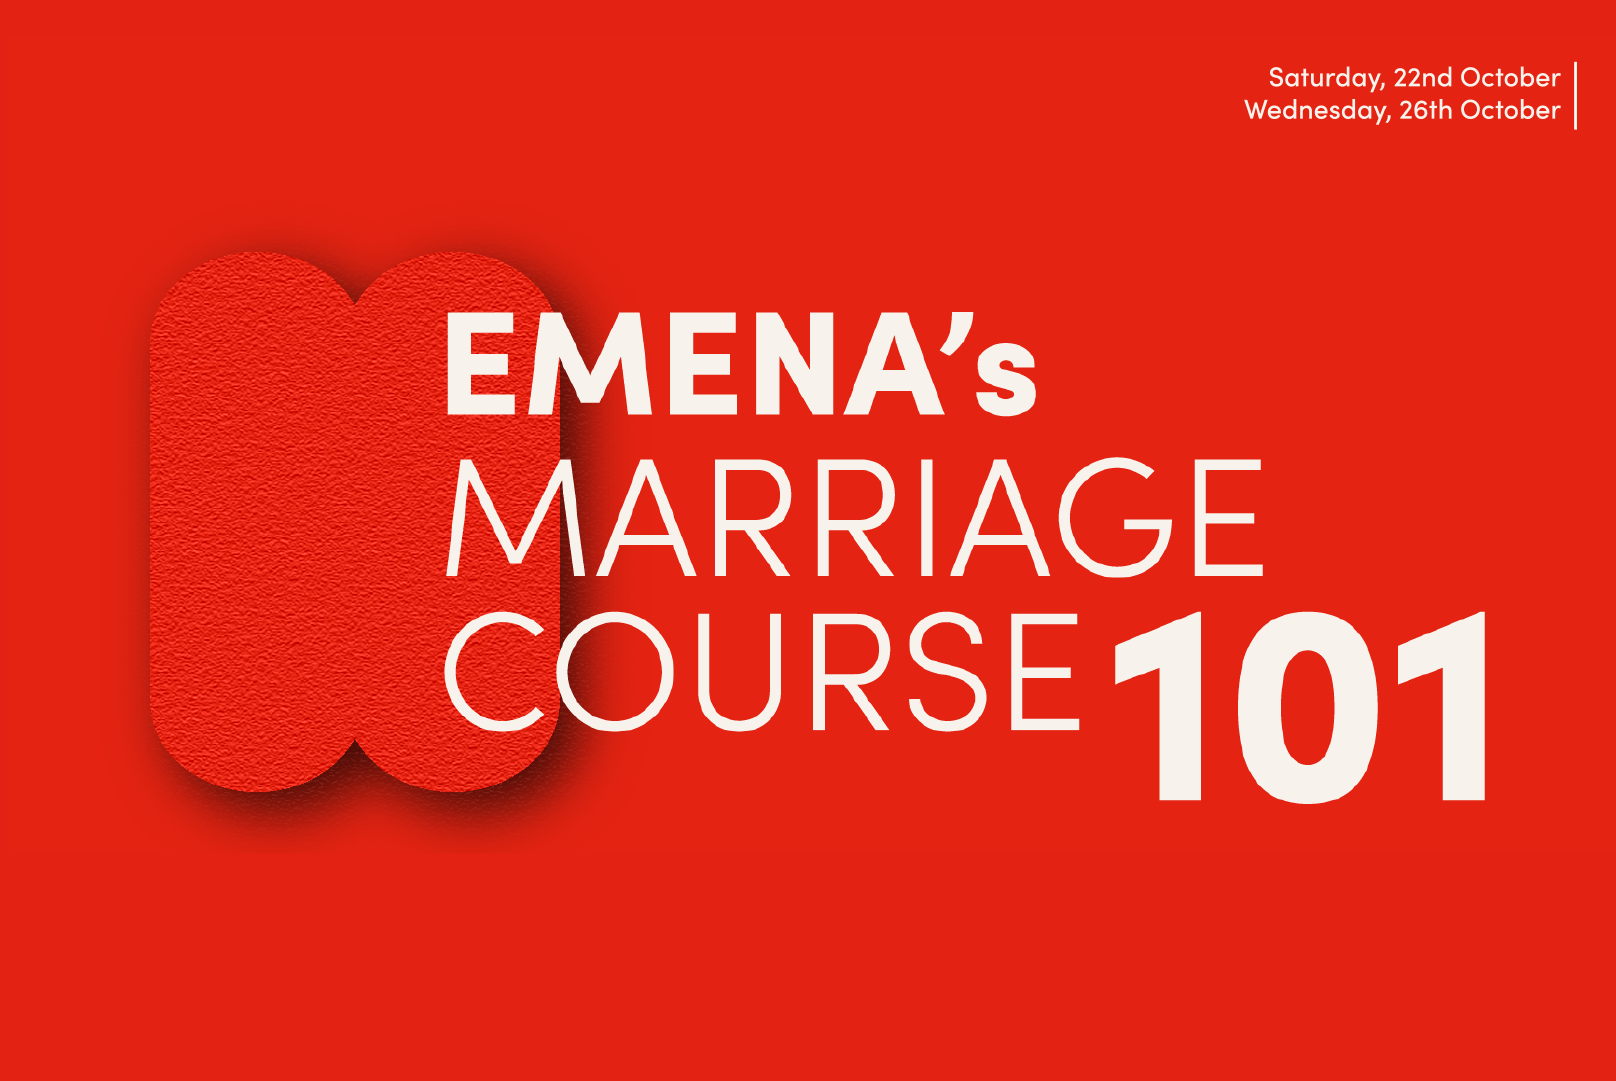 Marriage Course 101